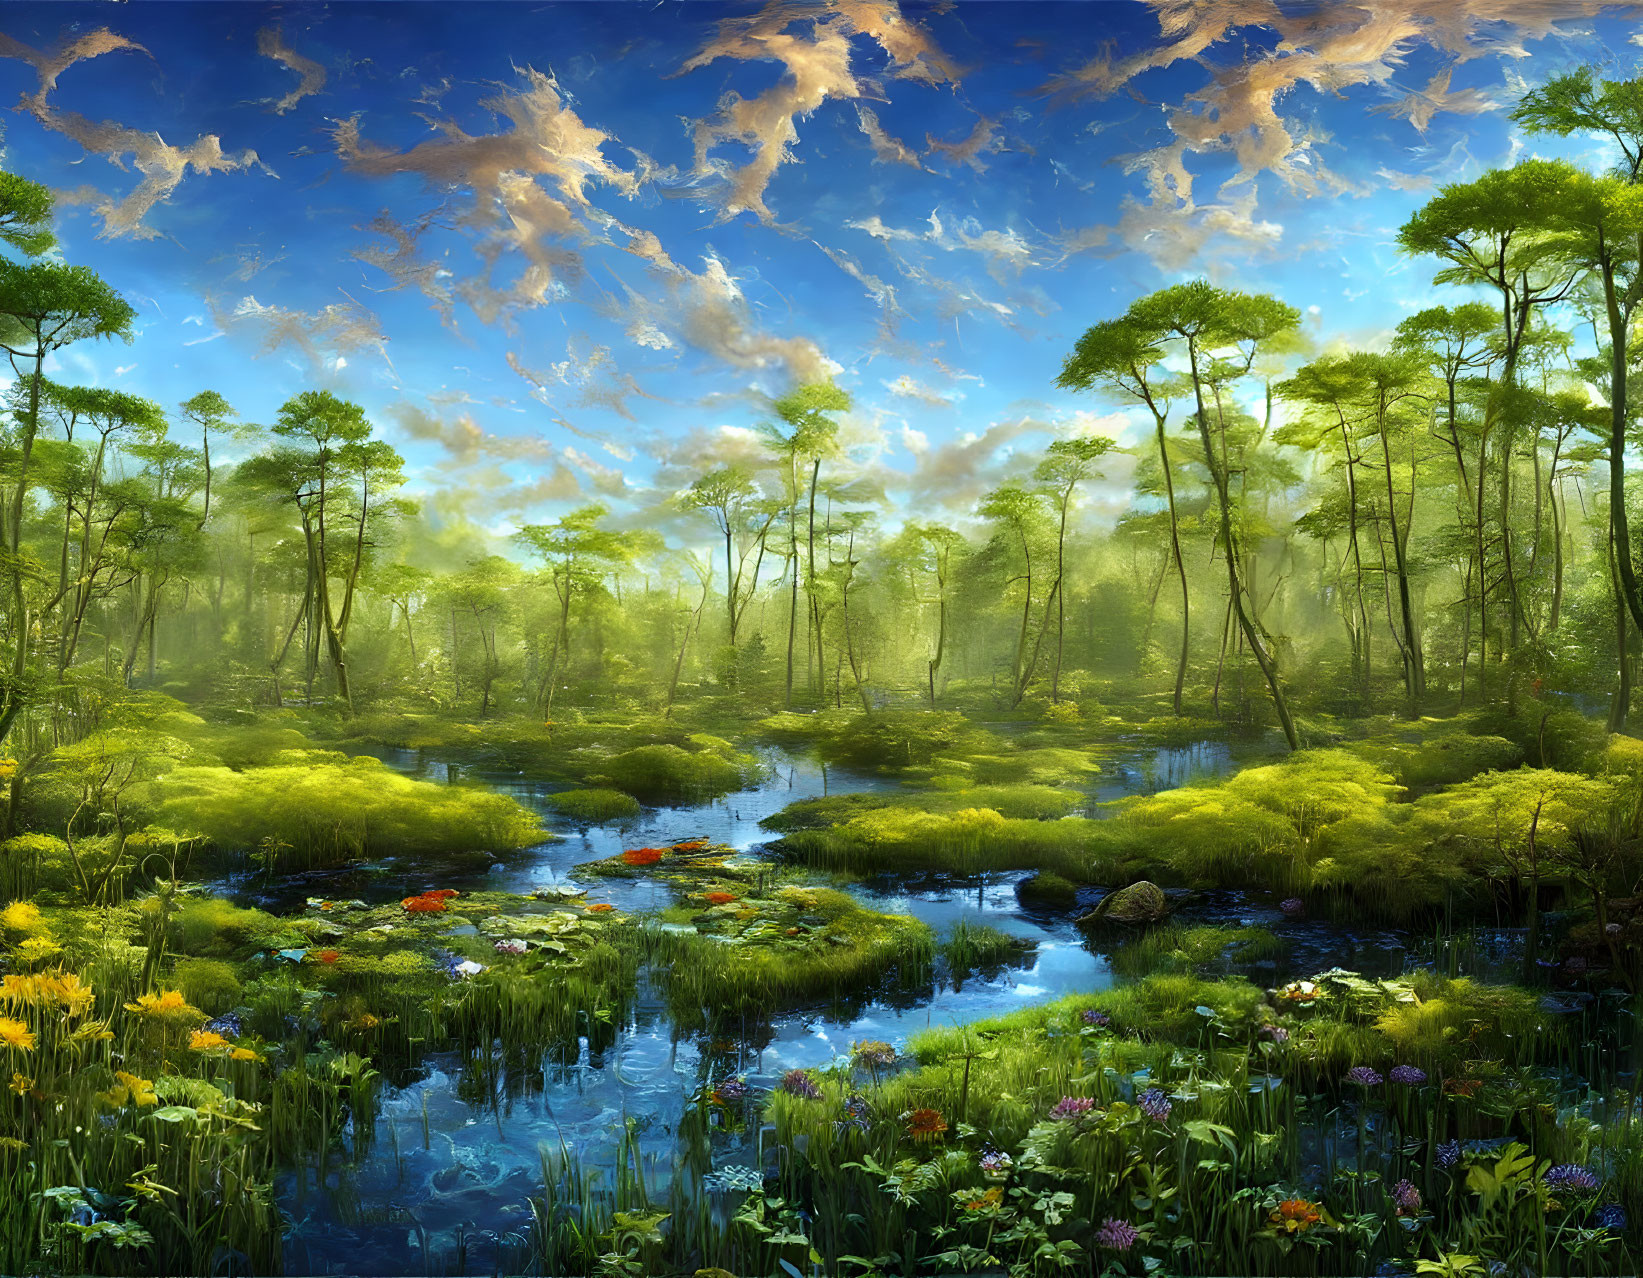 Tranquil forest scene with towering trees, serene waterway, wildflowers, and picturesque sky